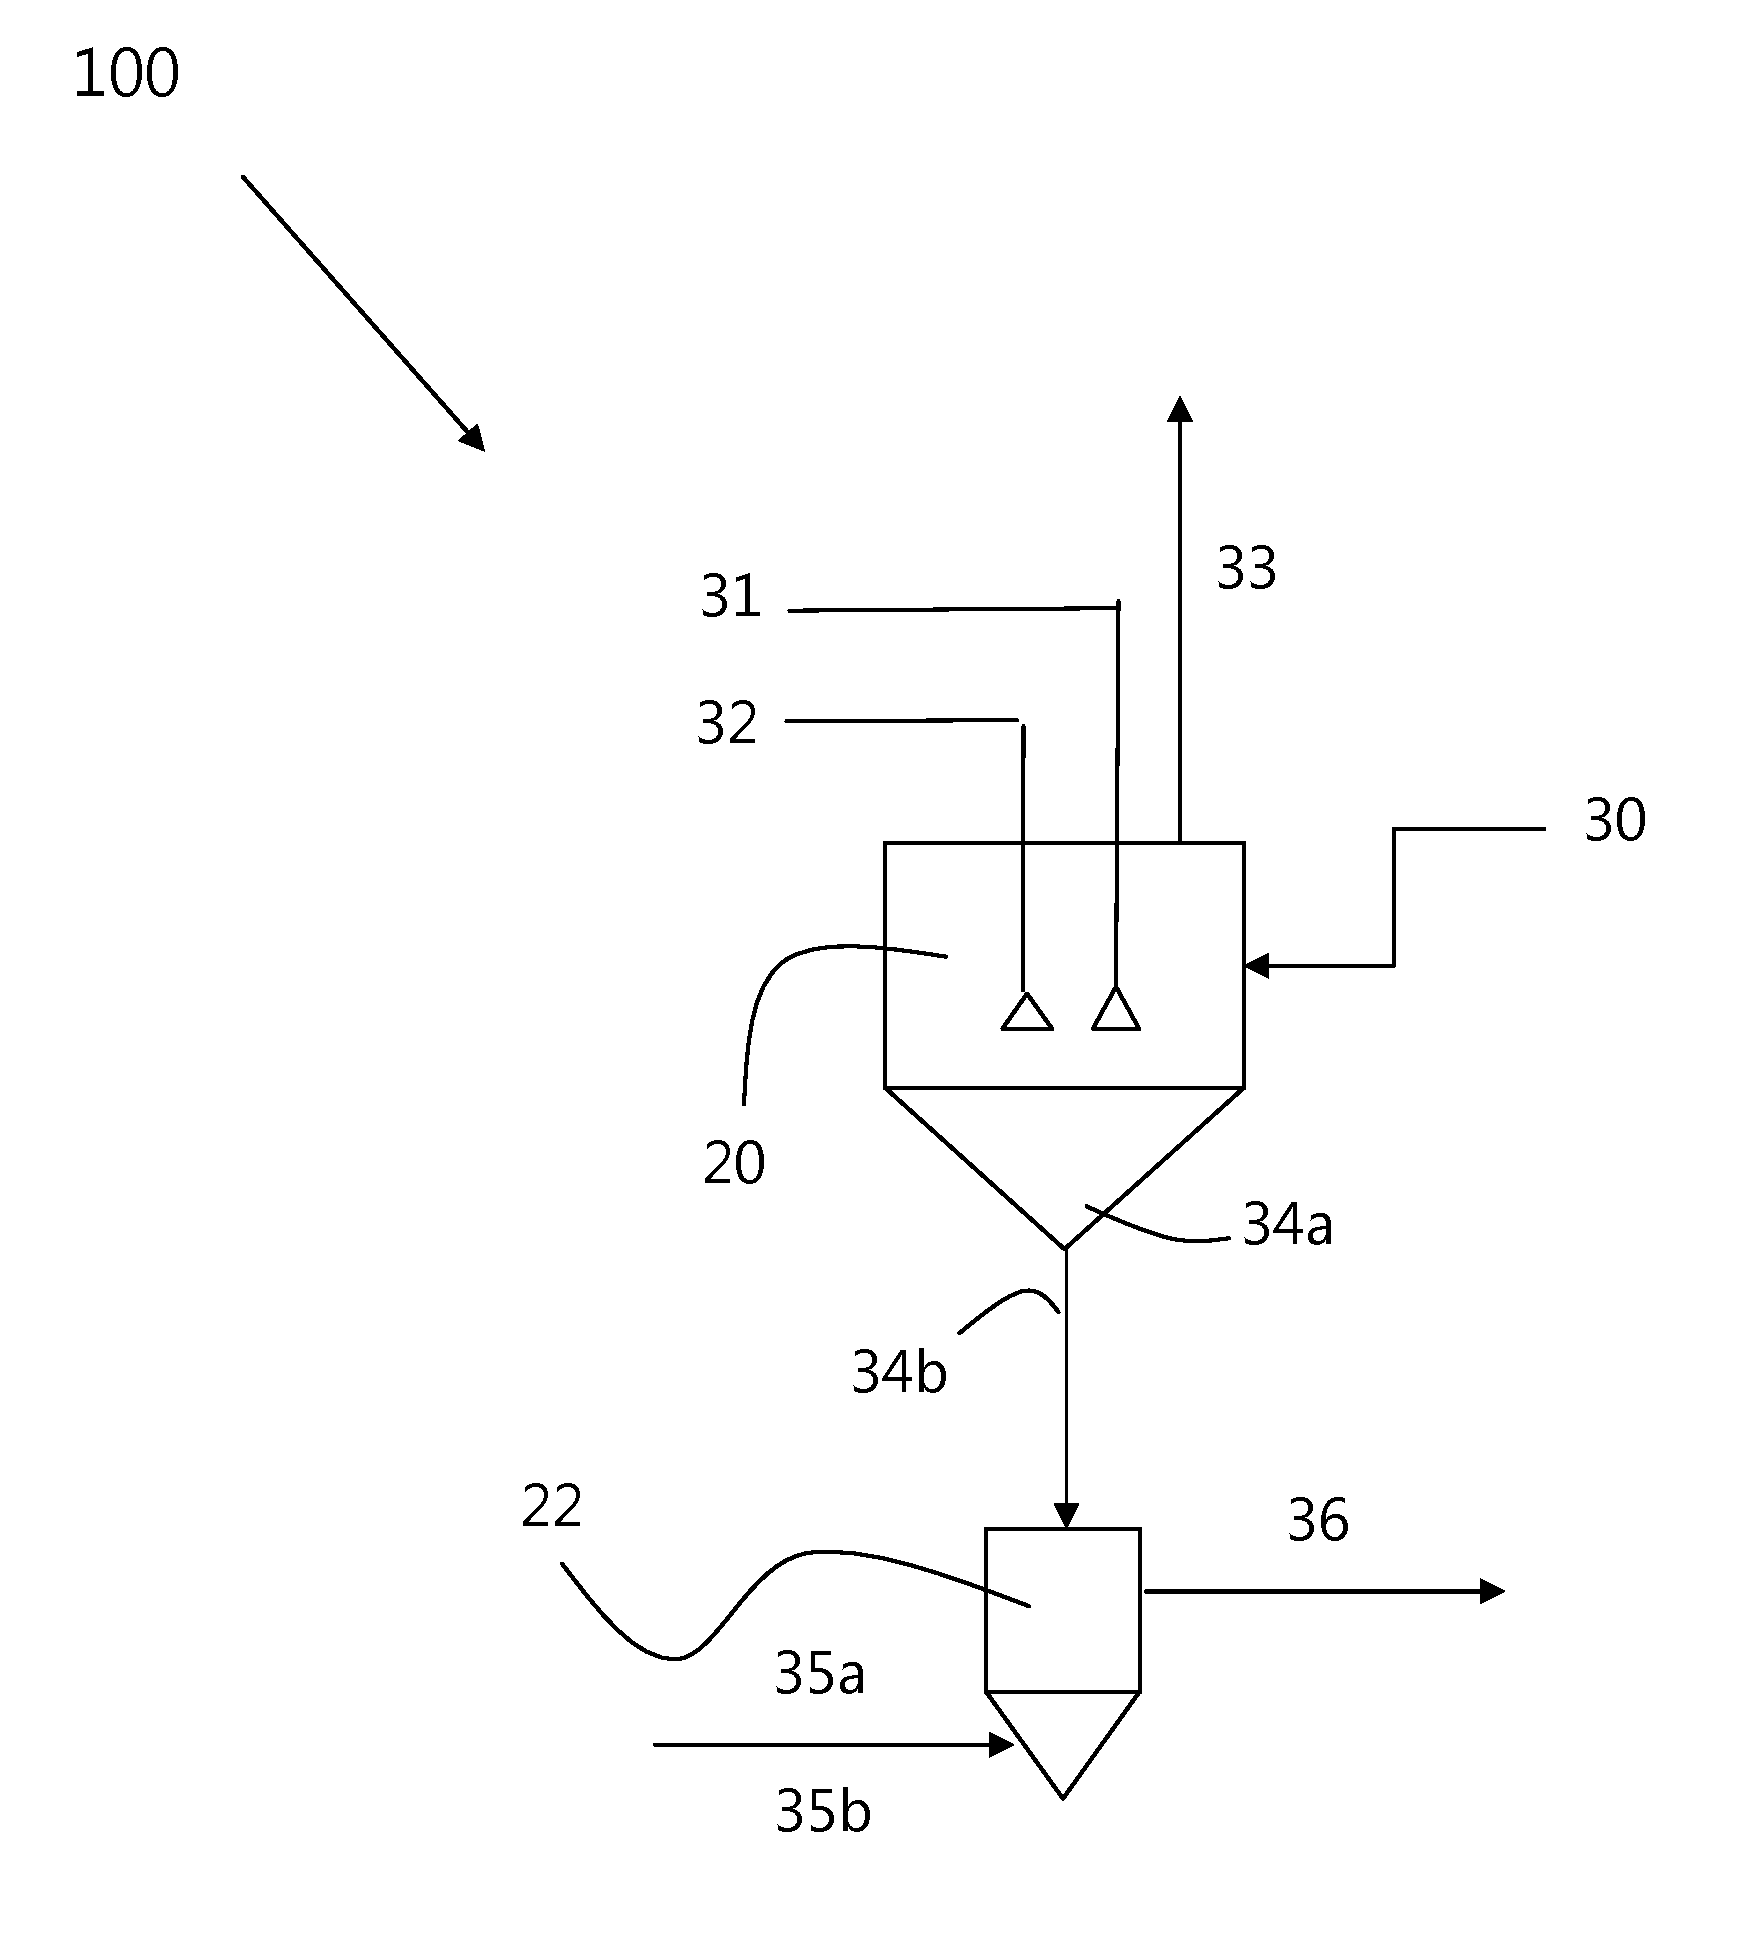 Chemical process to produce hydrogen chloride and chloride-free compound potassium sulfate fertilizers or other metal sulfates